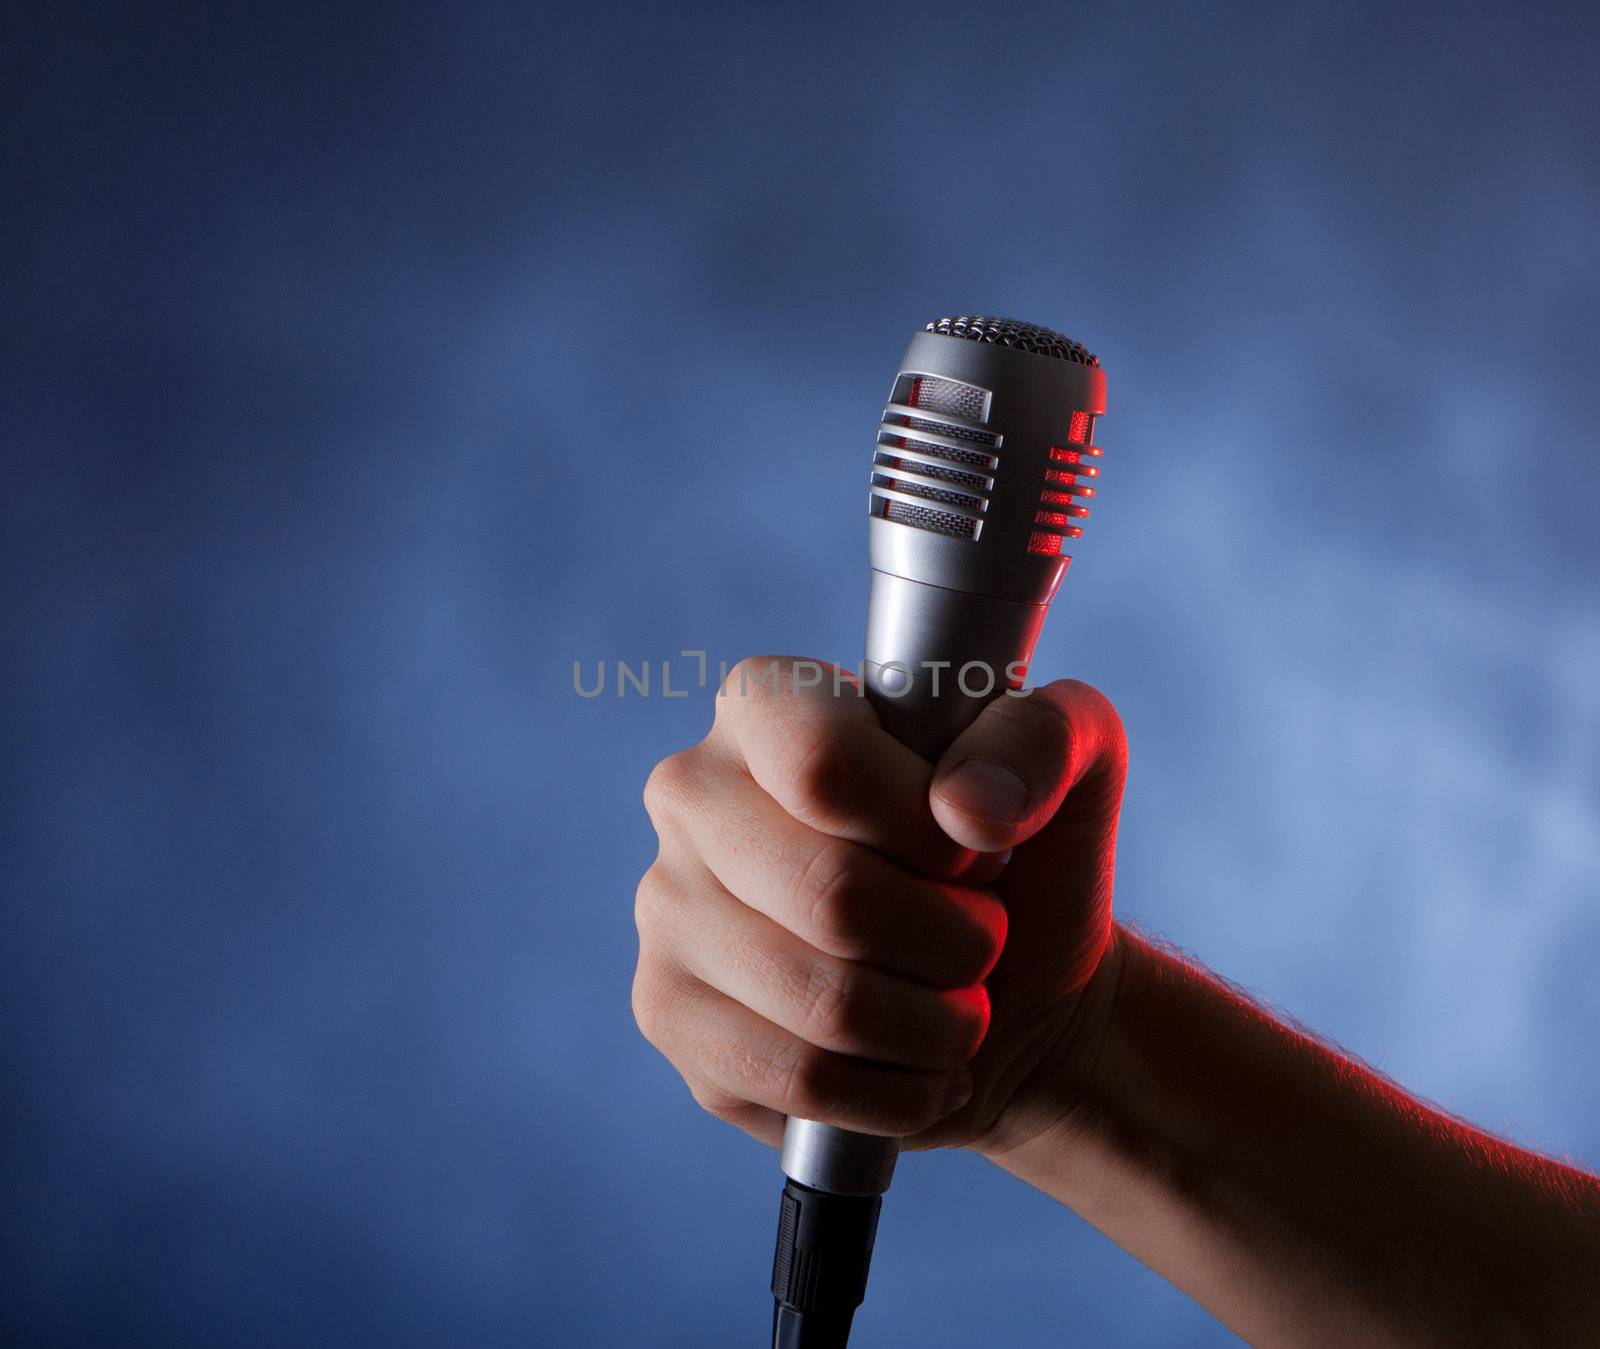 microphone in hand on the dark background